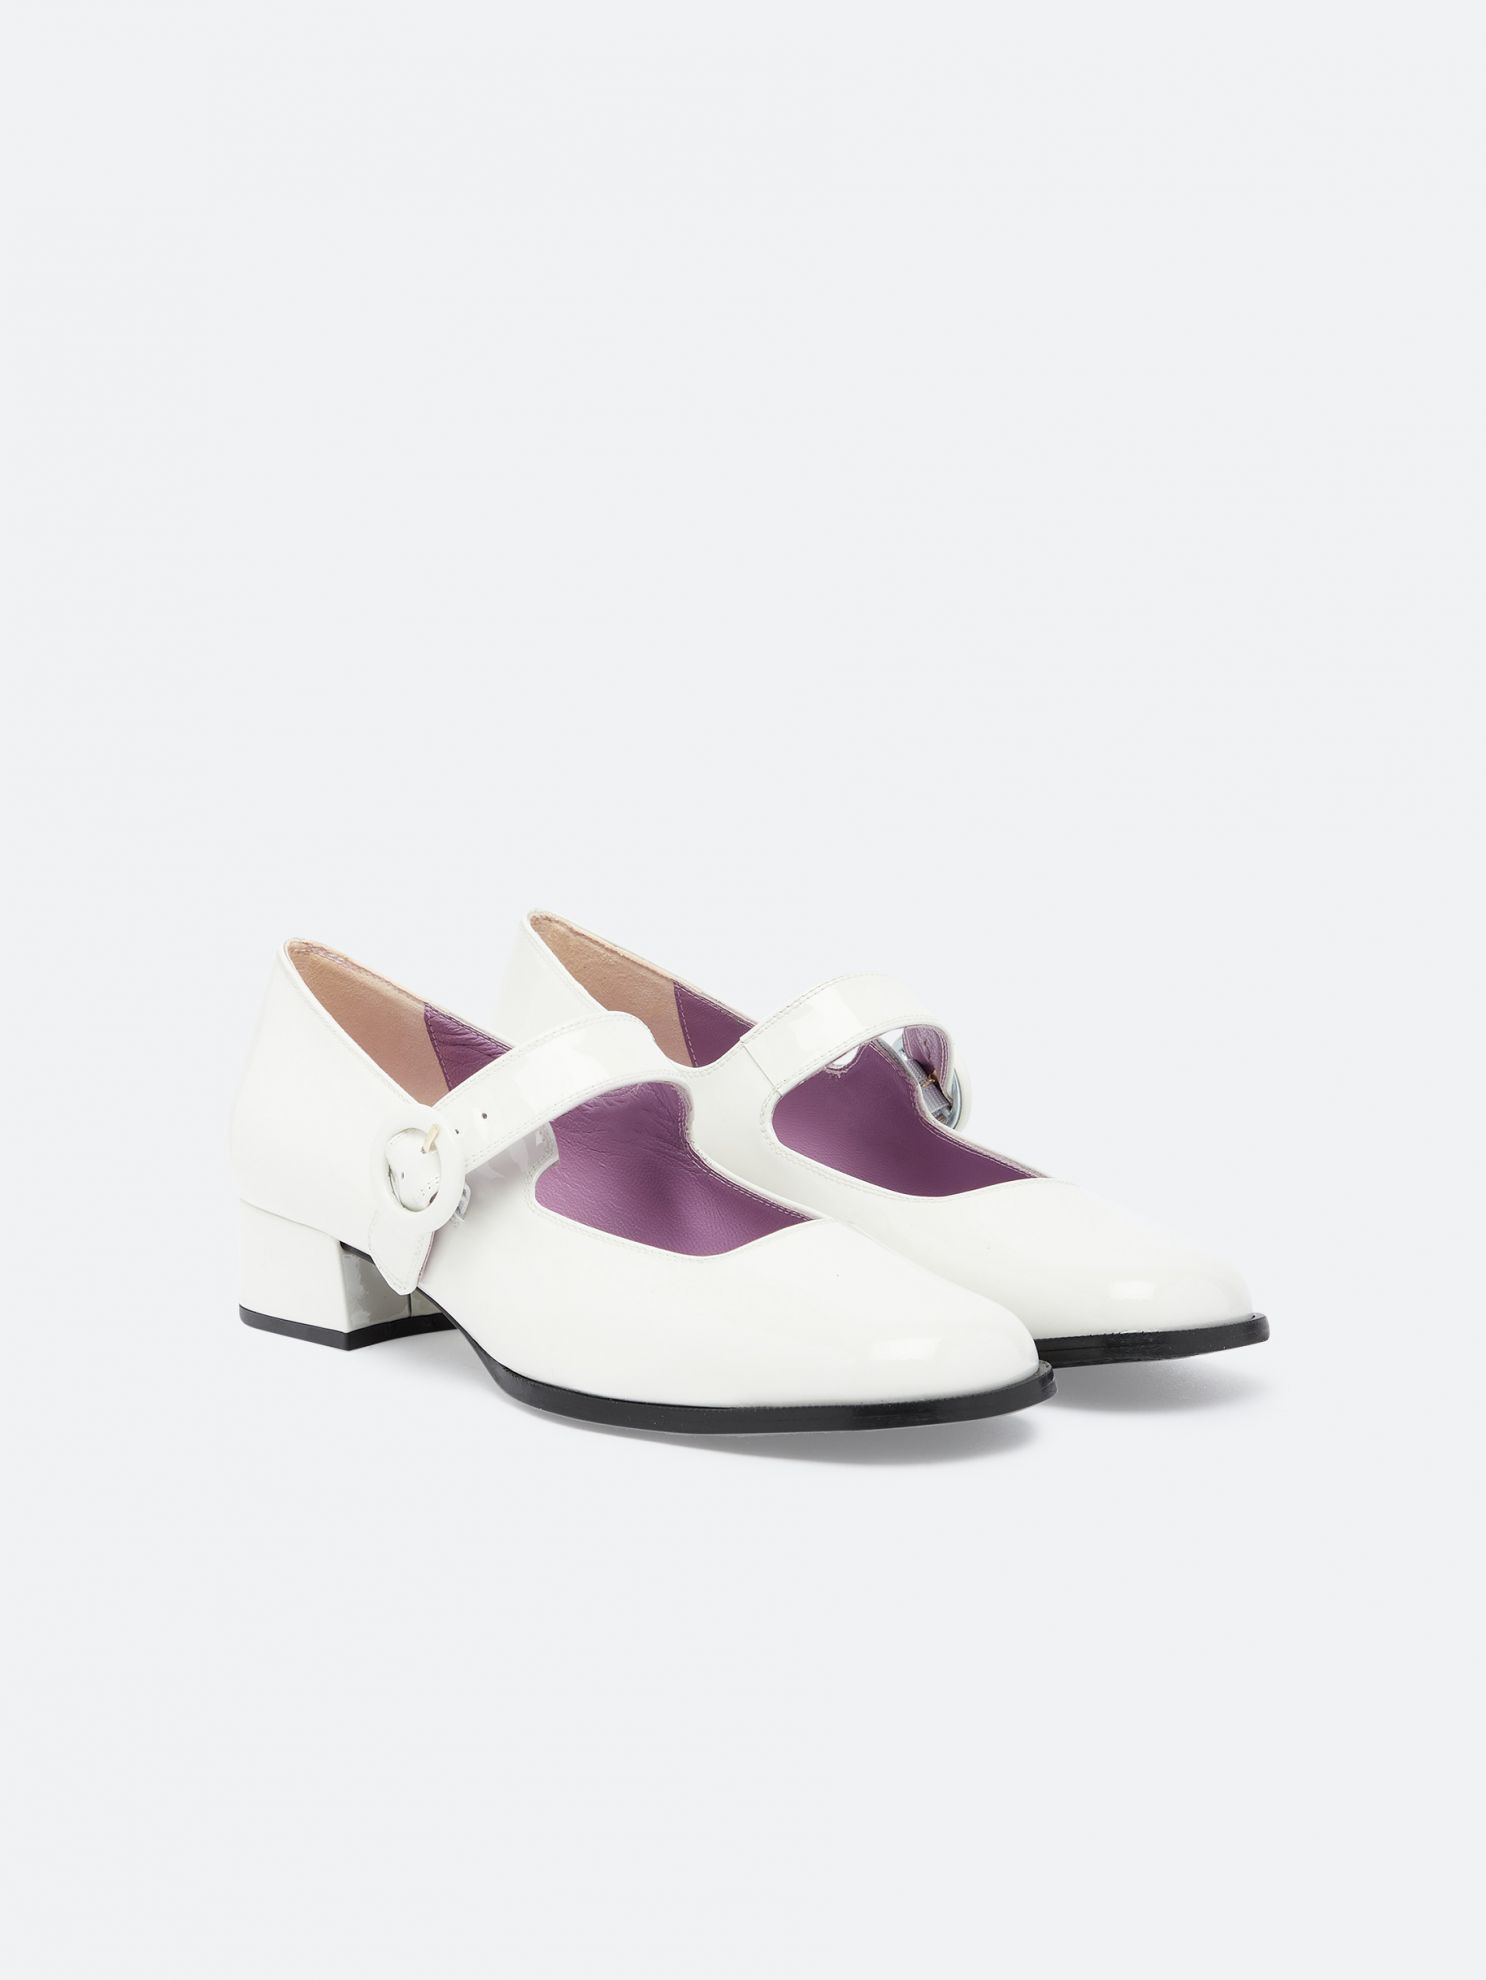 TWIGGY White patent leather Mary janes | Carel Paris Shoes